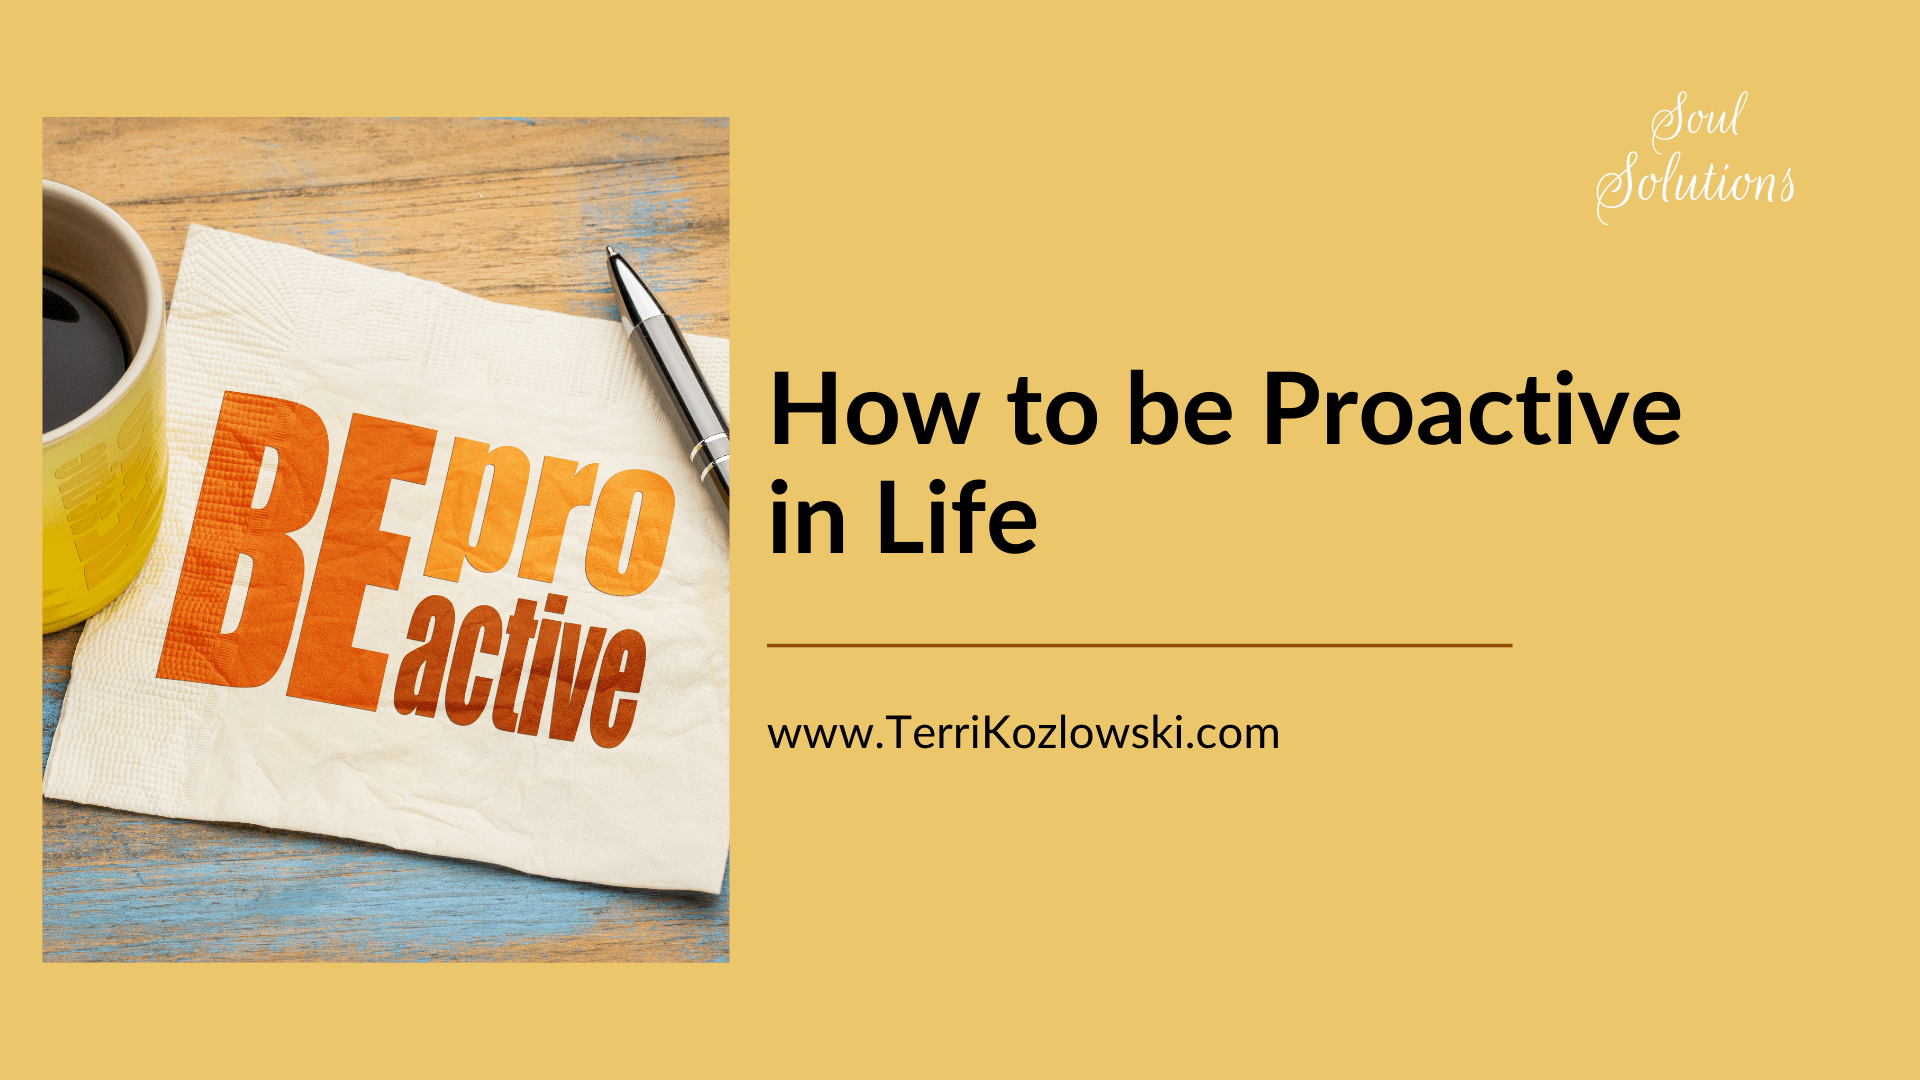 How to be Proactive in Life